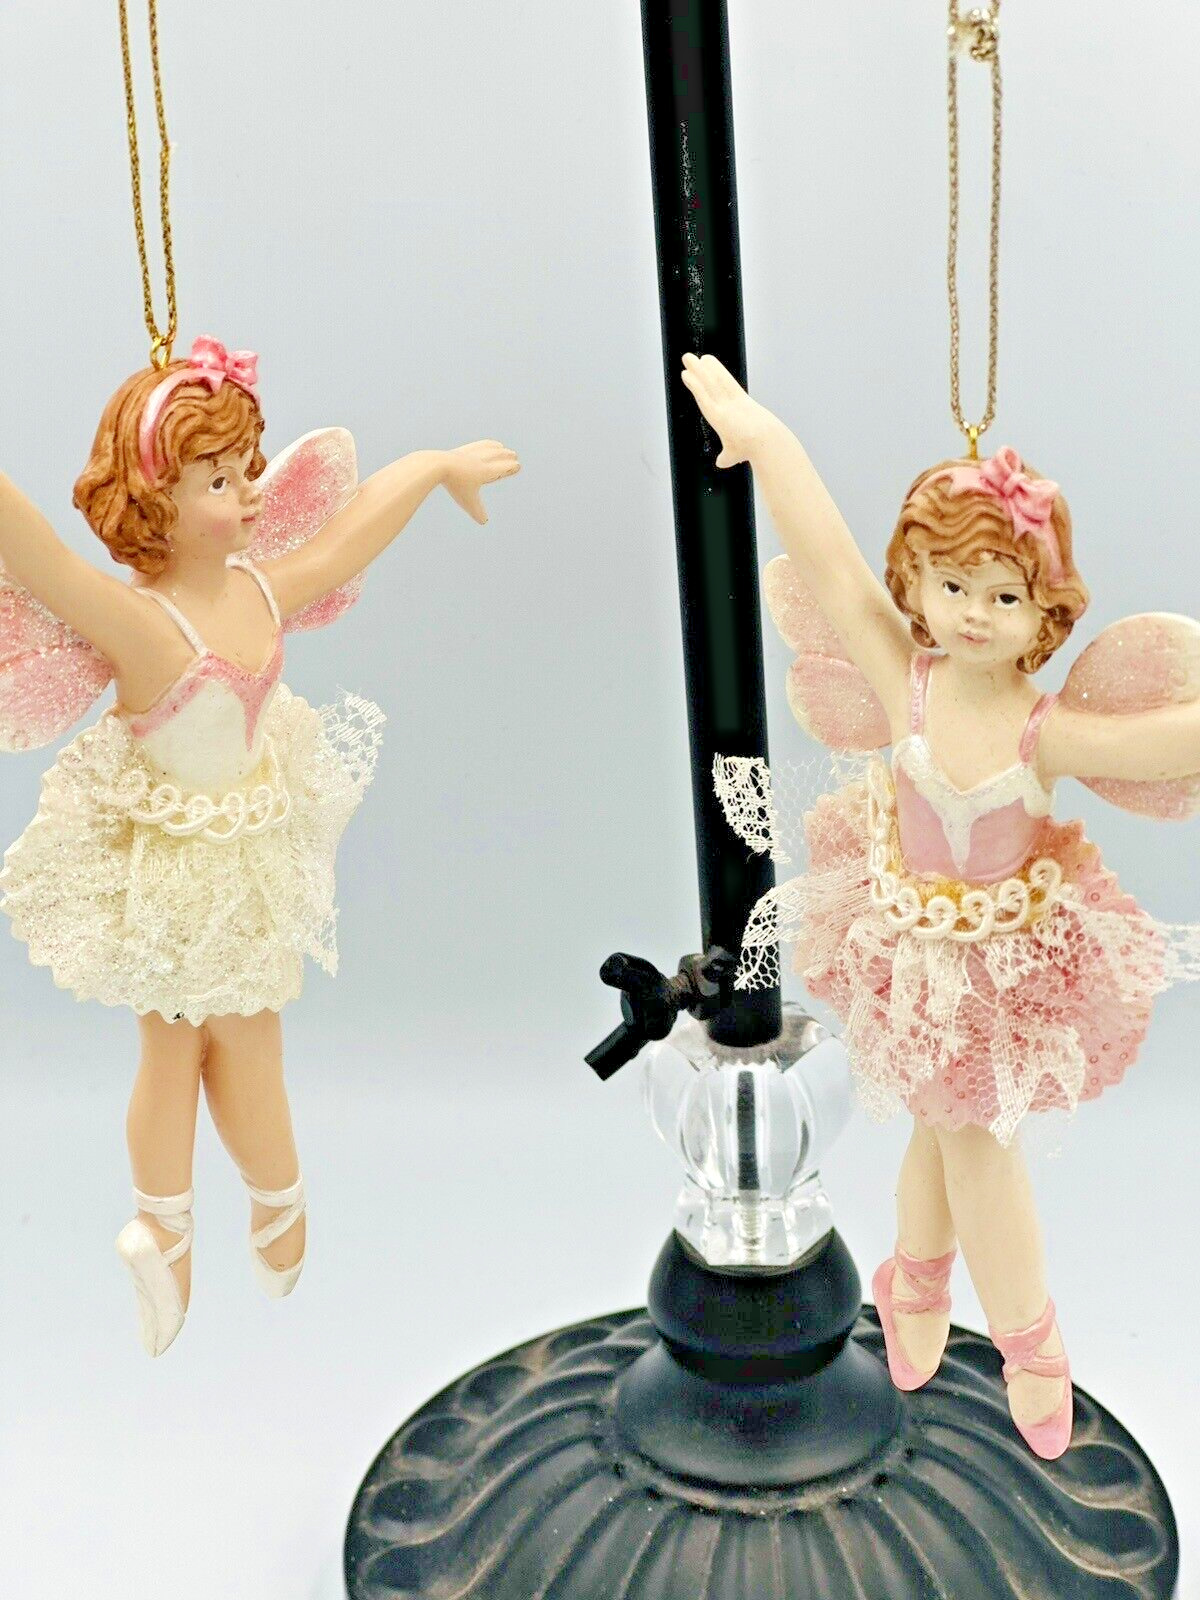 Vintage Girl Ballerina Butterfly Ornaments Lot of 2 # 1753